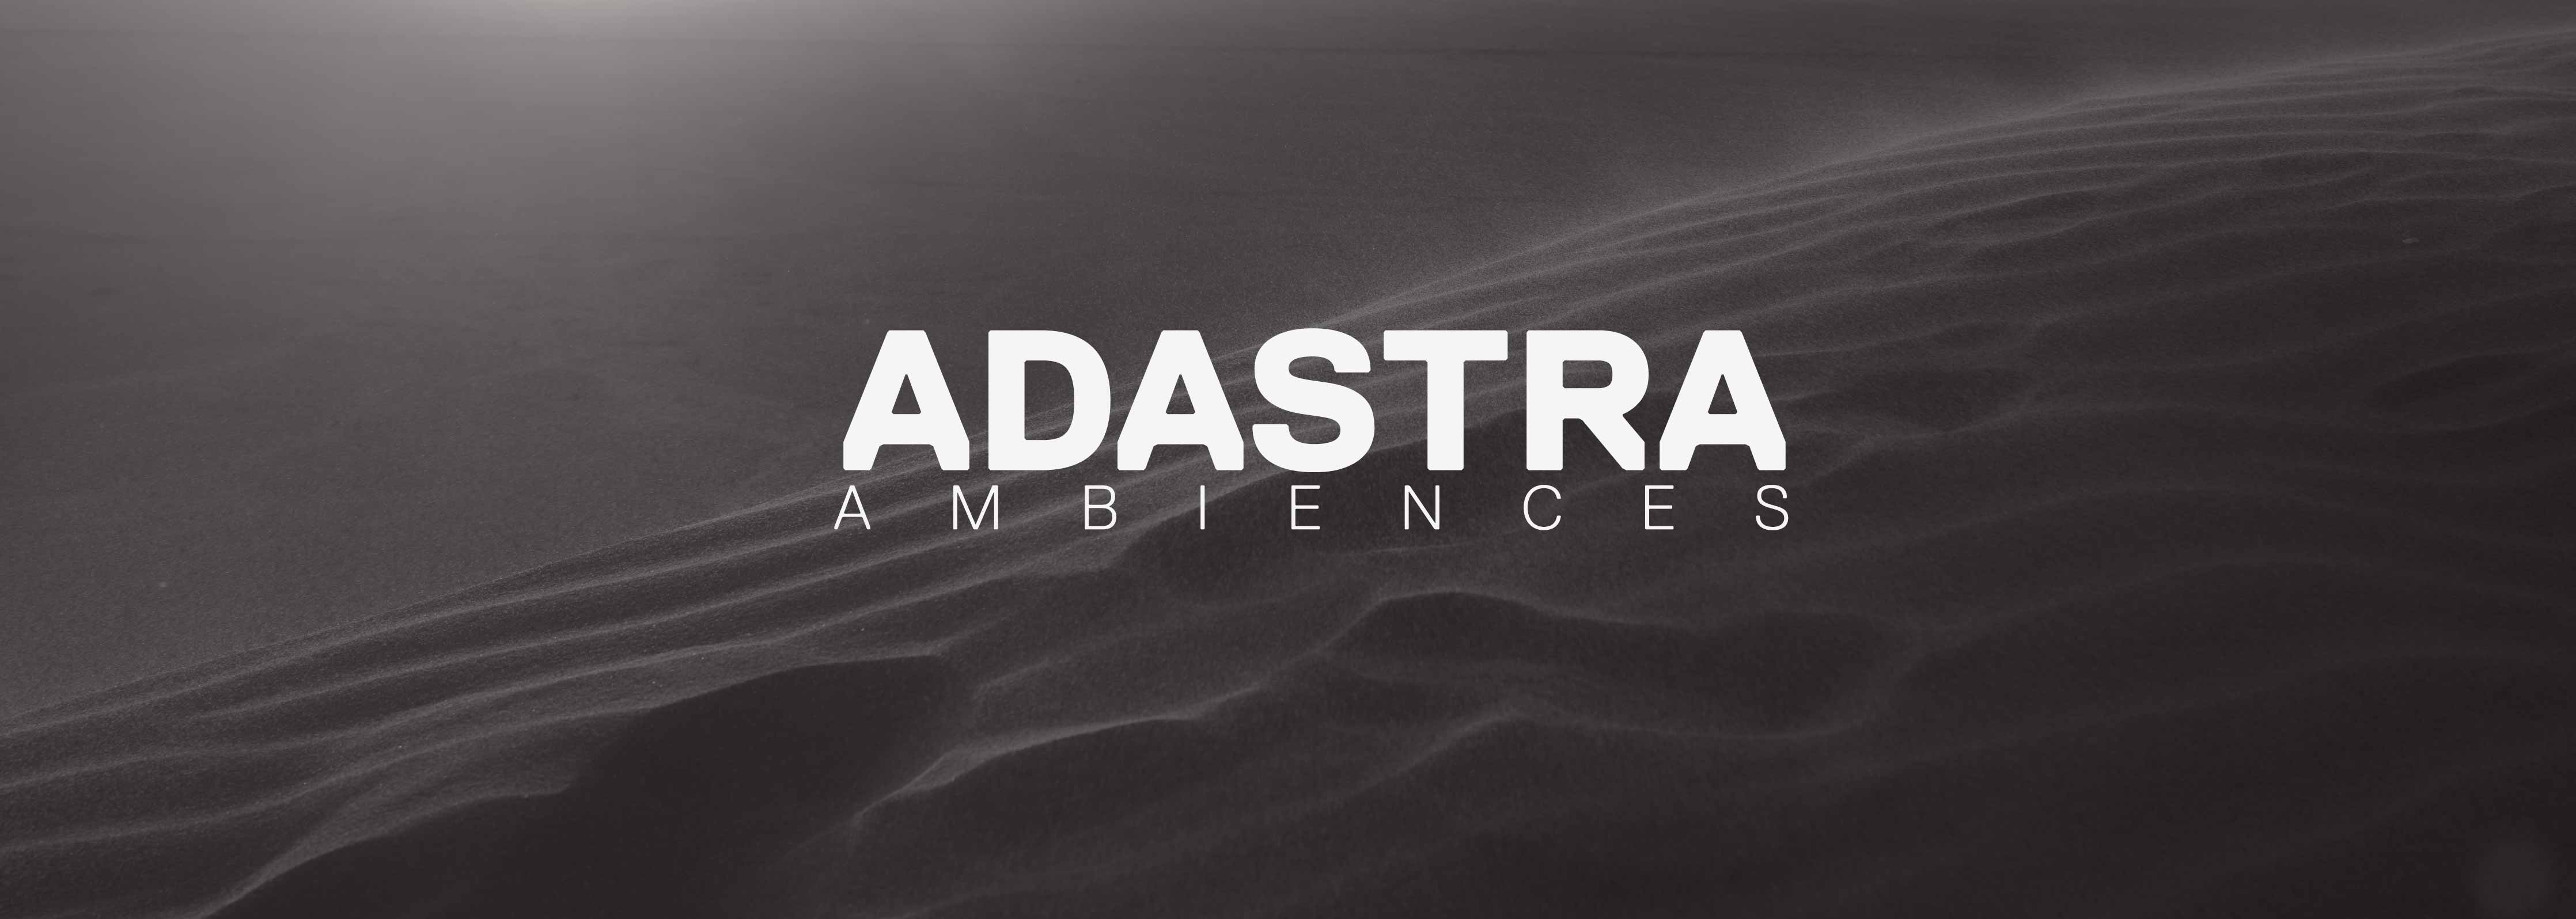 Explore the Shimmering Beauty of Adastra Ambiences - Available Now for FREE